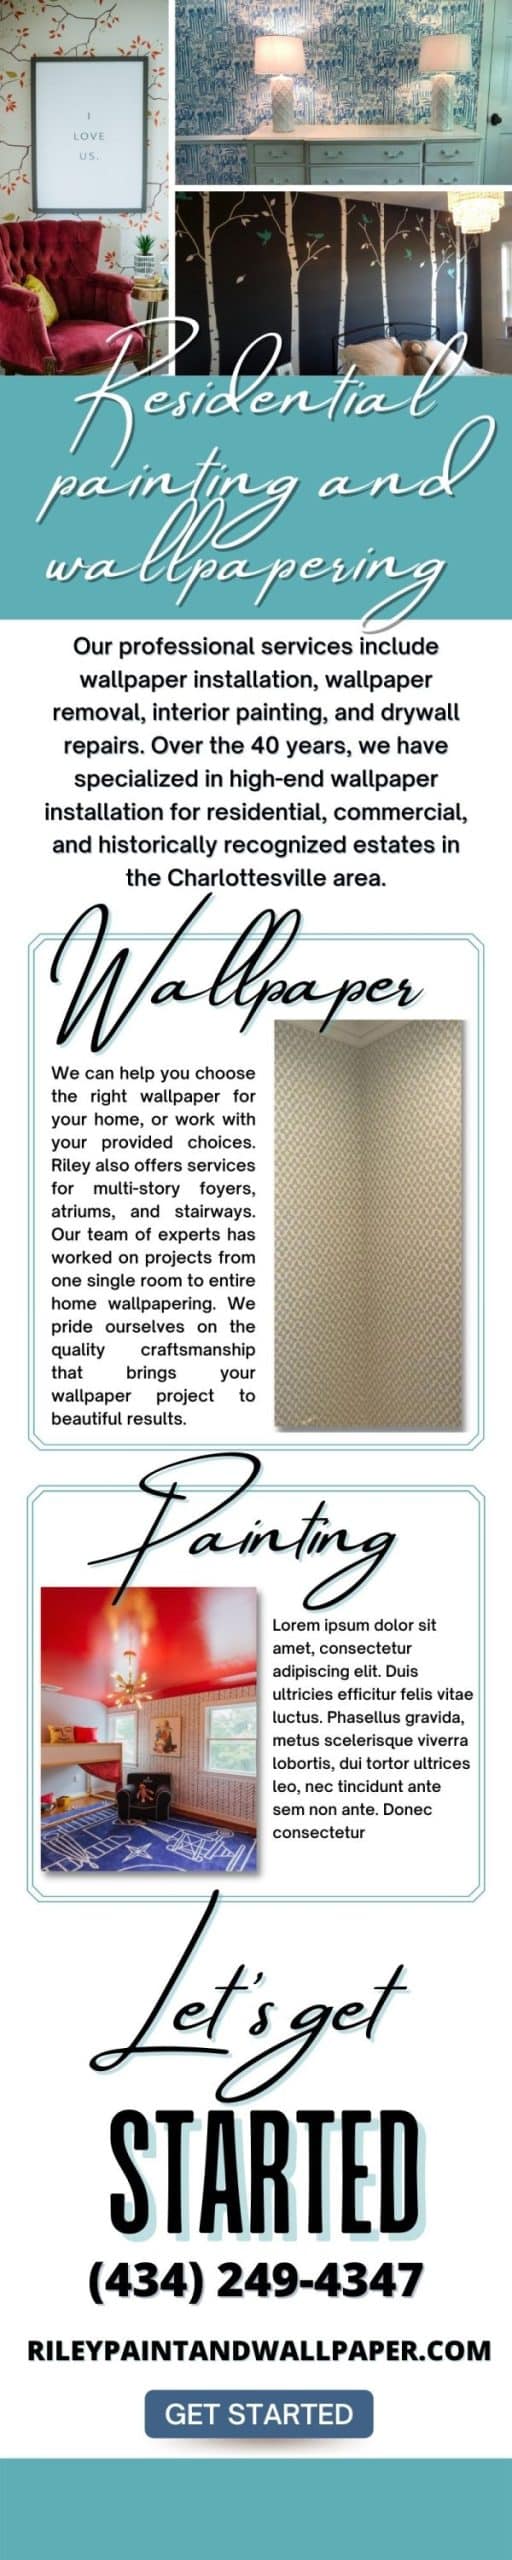 Residential Painting and Wallpapering 1